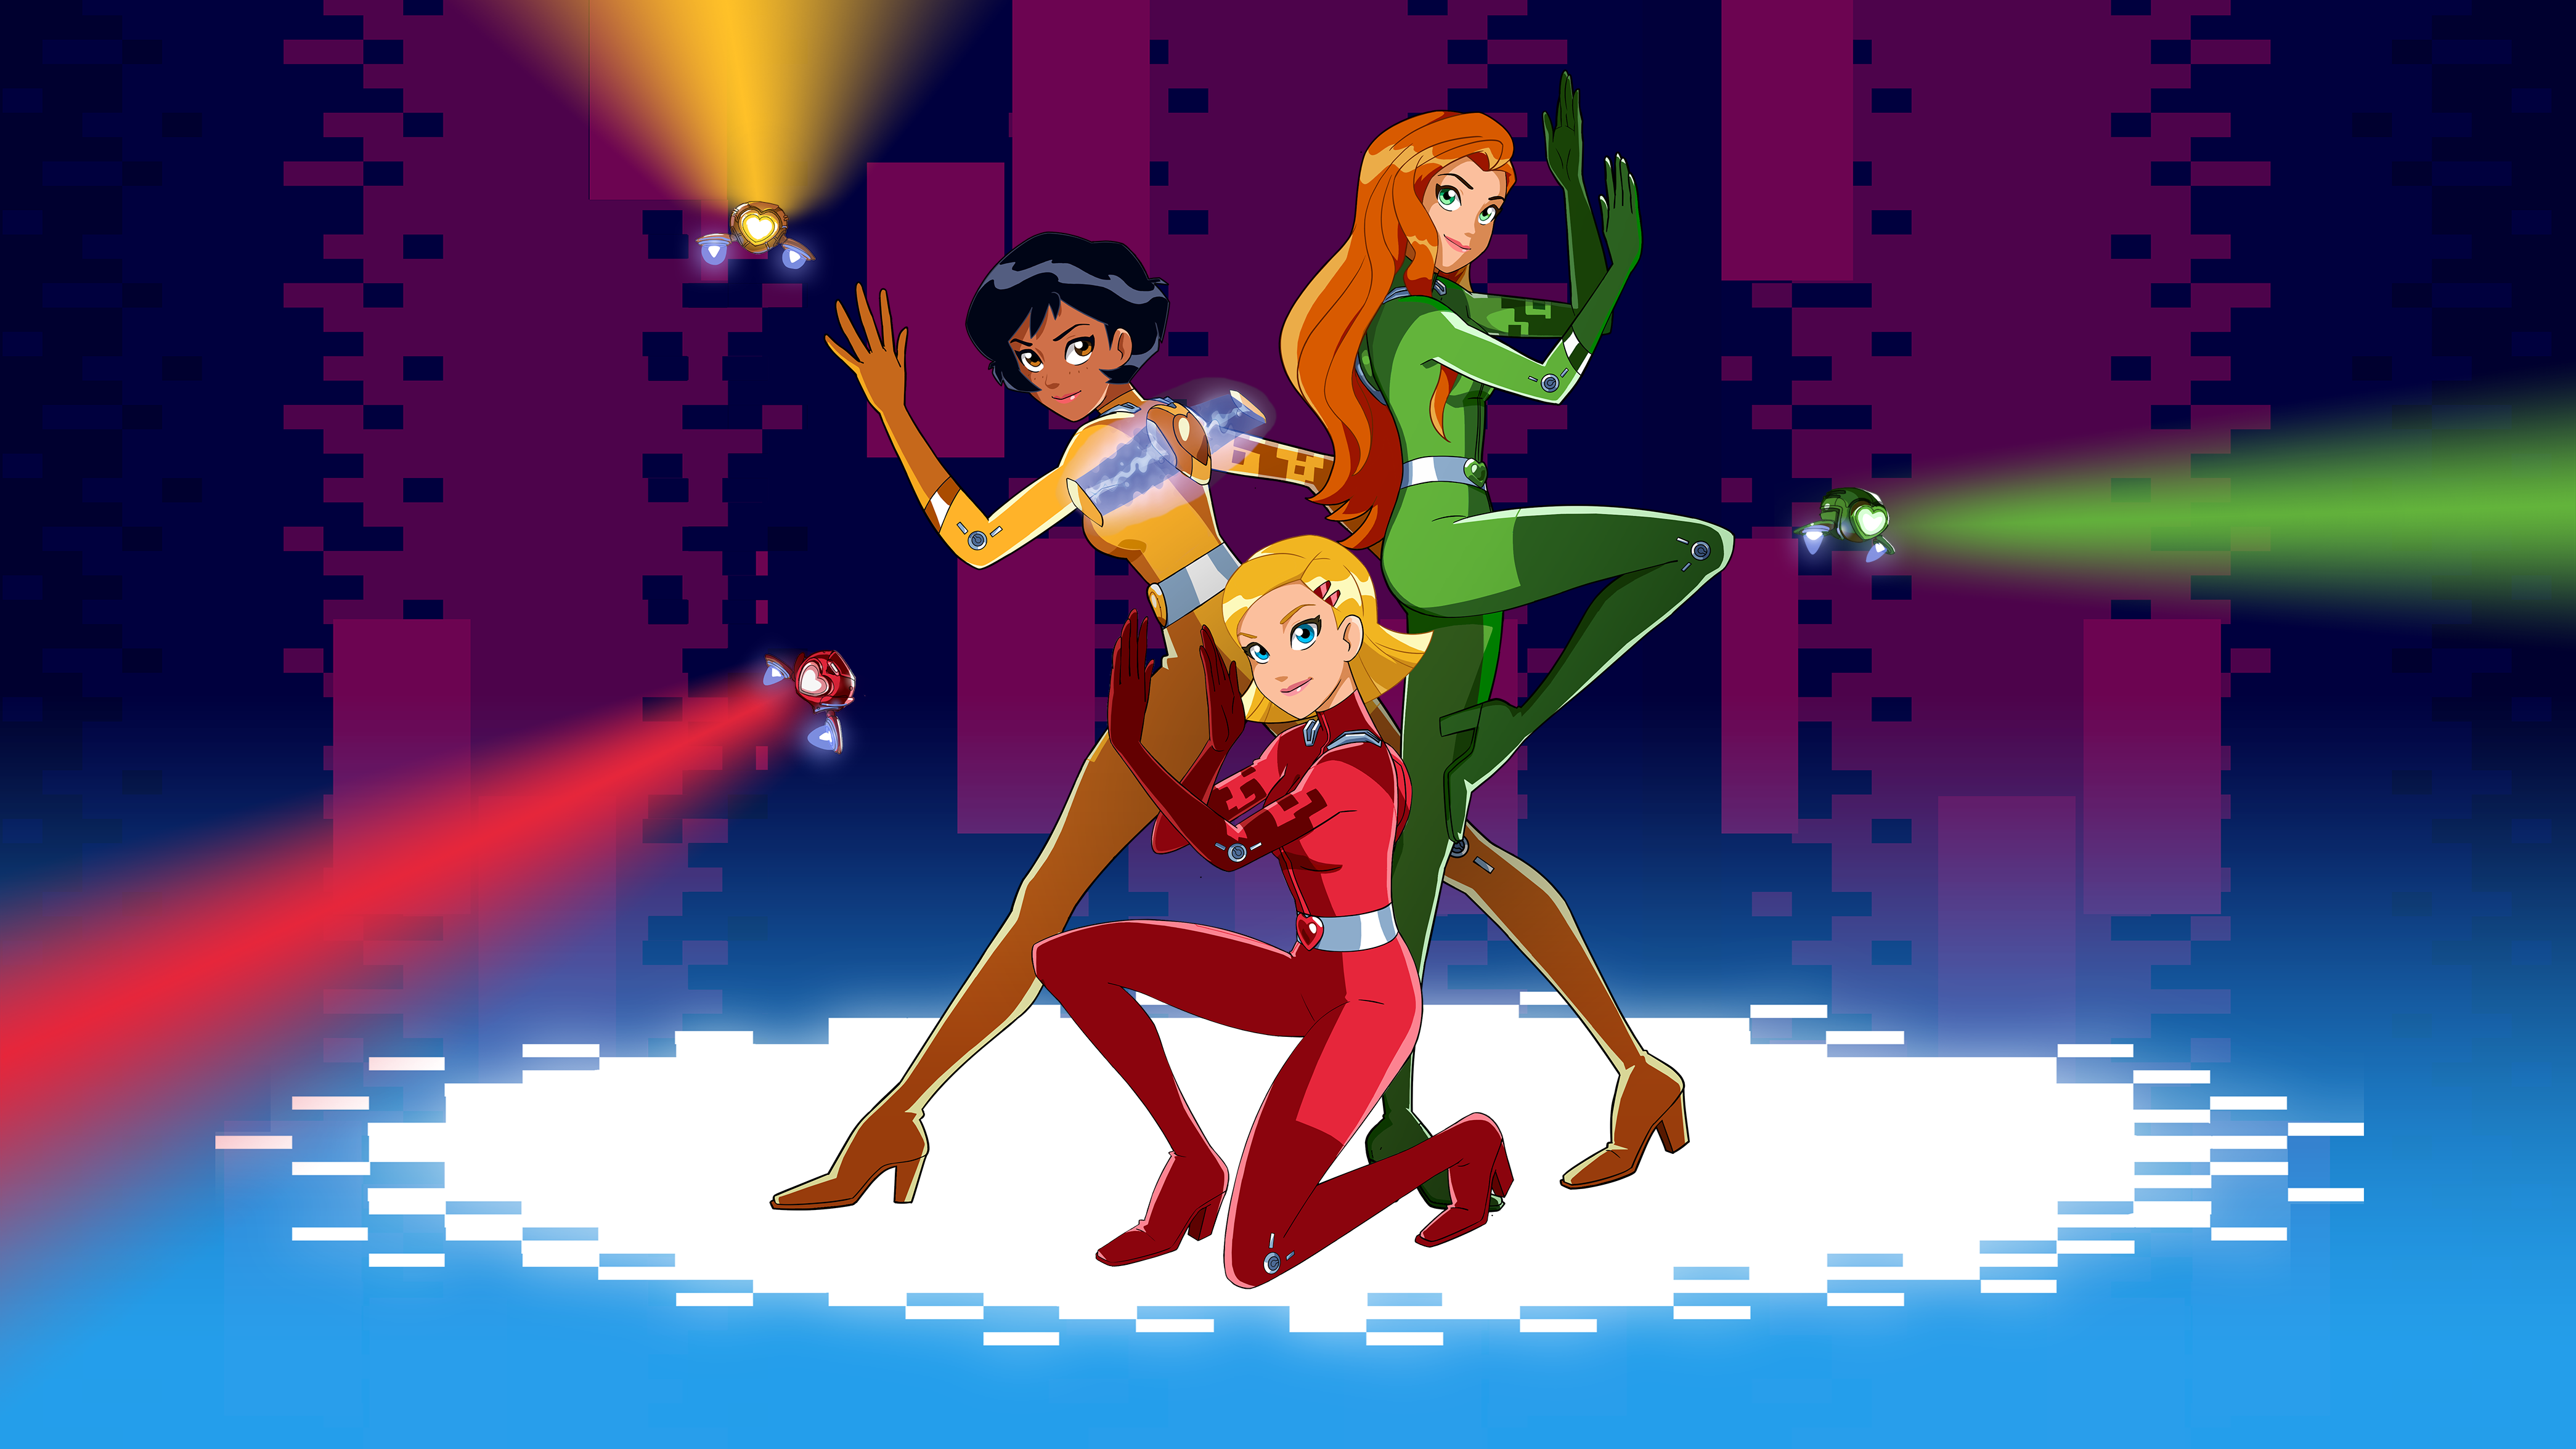 Totally Spies season 7 pictures, posters and wallpapers.